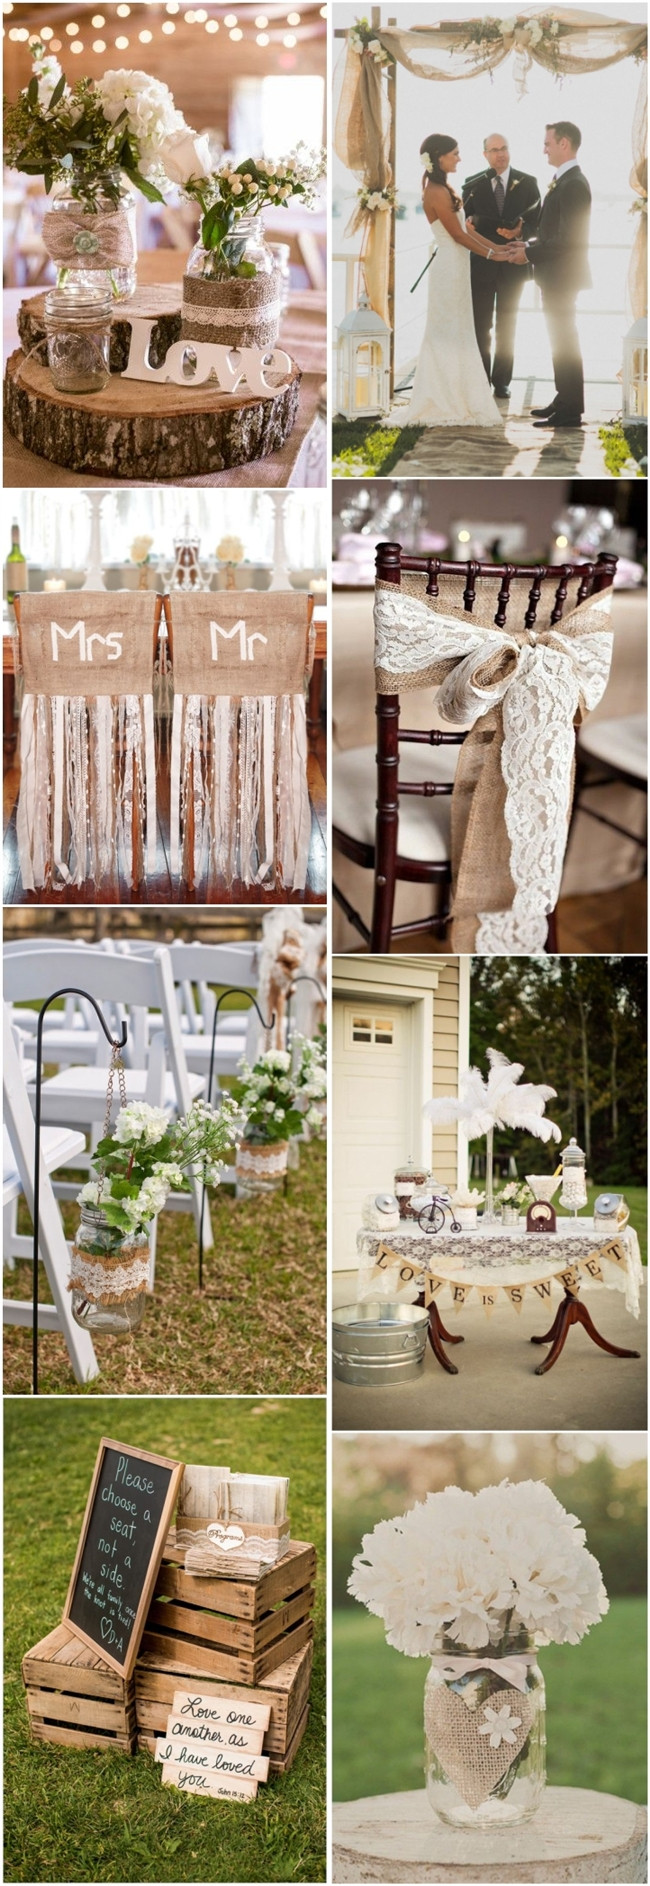 Country Weddings Decorations
 45 Chic Rustic Burlap & Lace Wedding Ideas and Inspiration